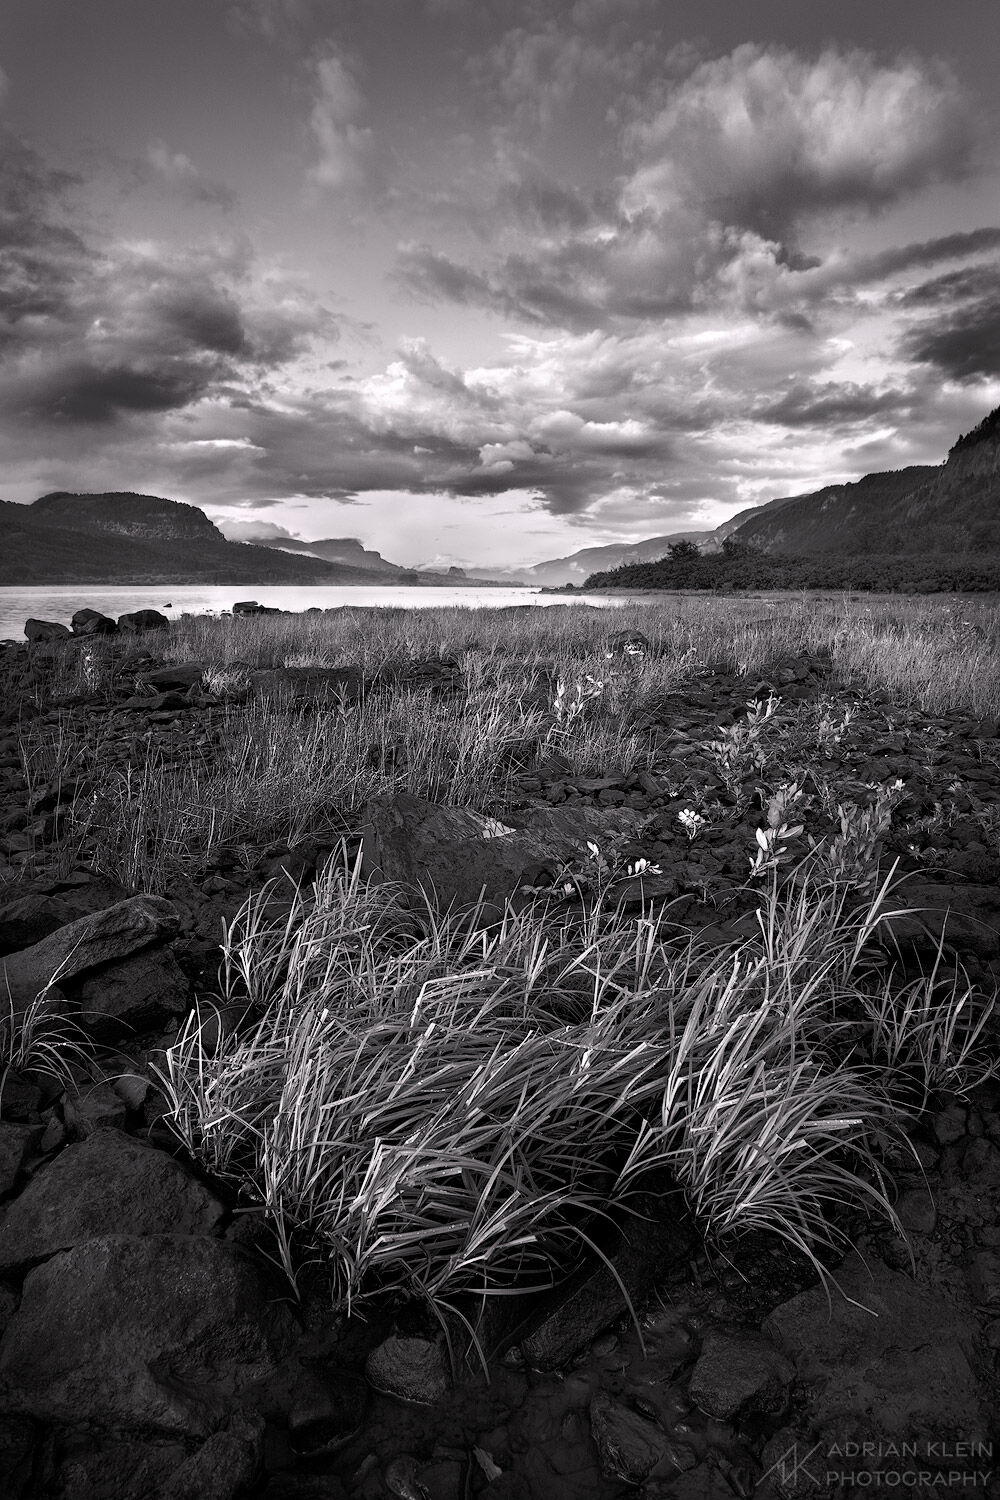 A storm sweeping through the Columbia River Gorge, Oregon leaves partial clearing. Limited Edition of 50.